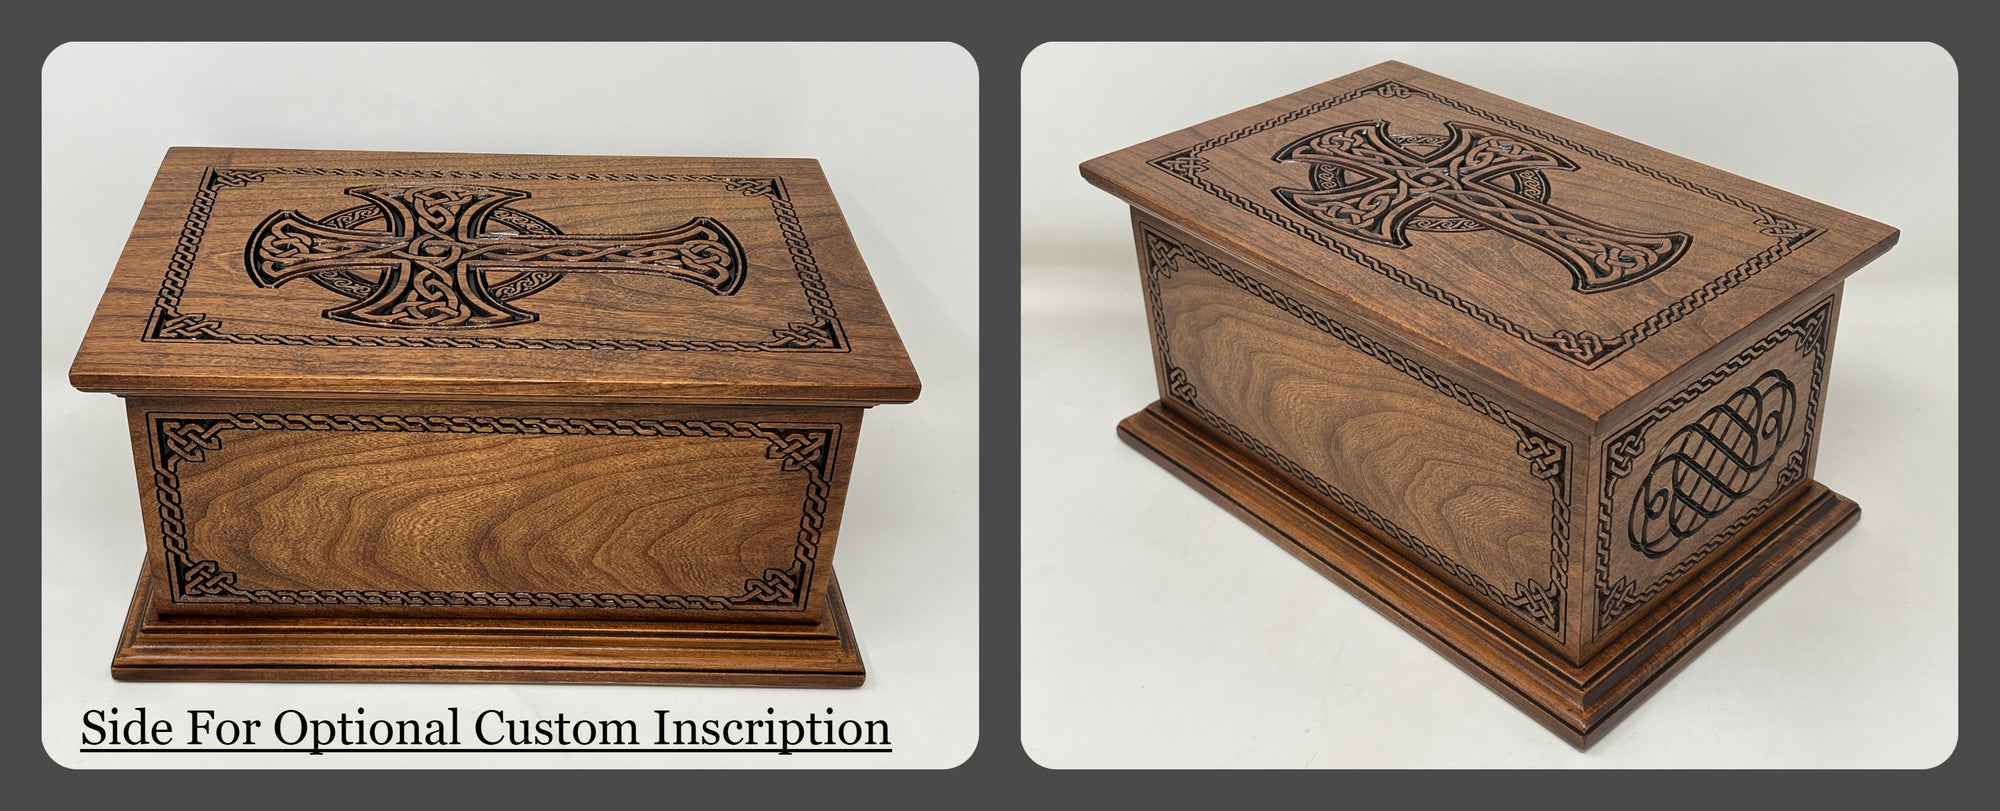 Two different angles showing the long side of the urn for human cremation ashes without the celtic knot so that it can be inscribed with the customers personalization/epitaph